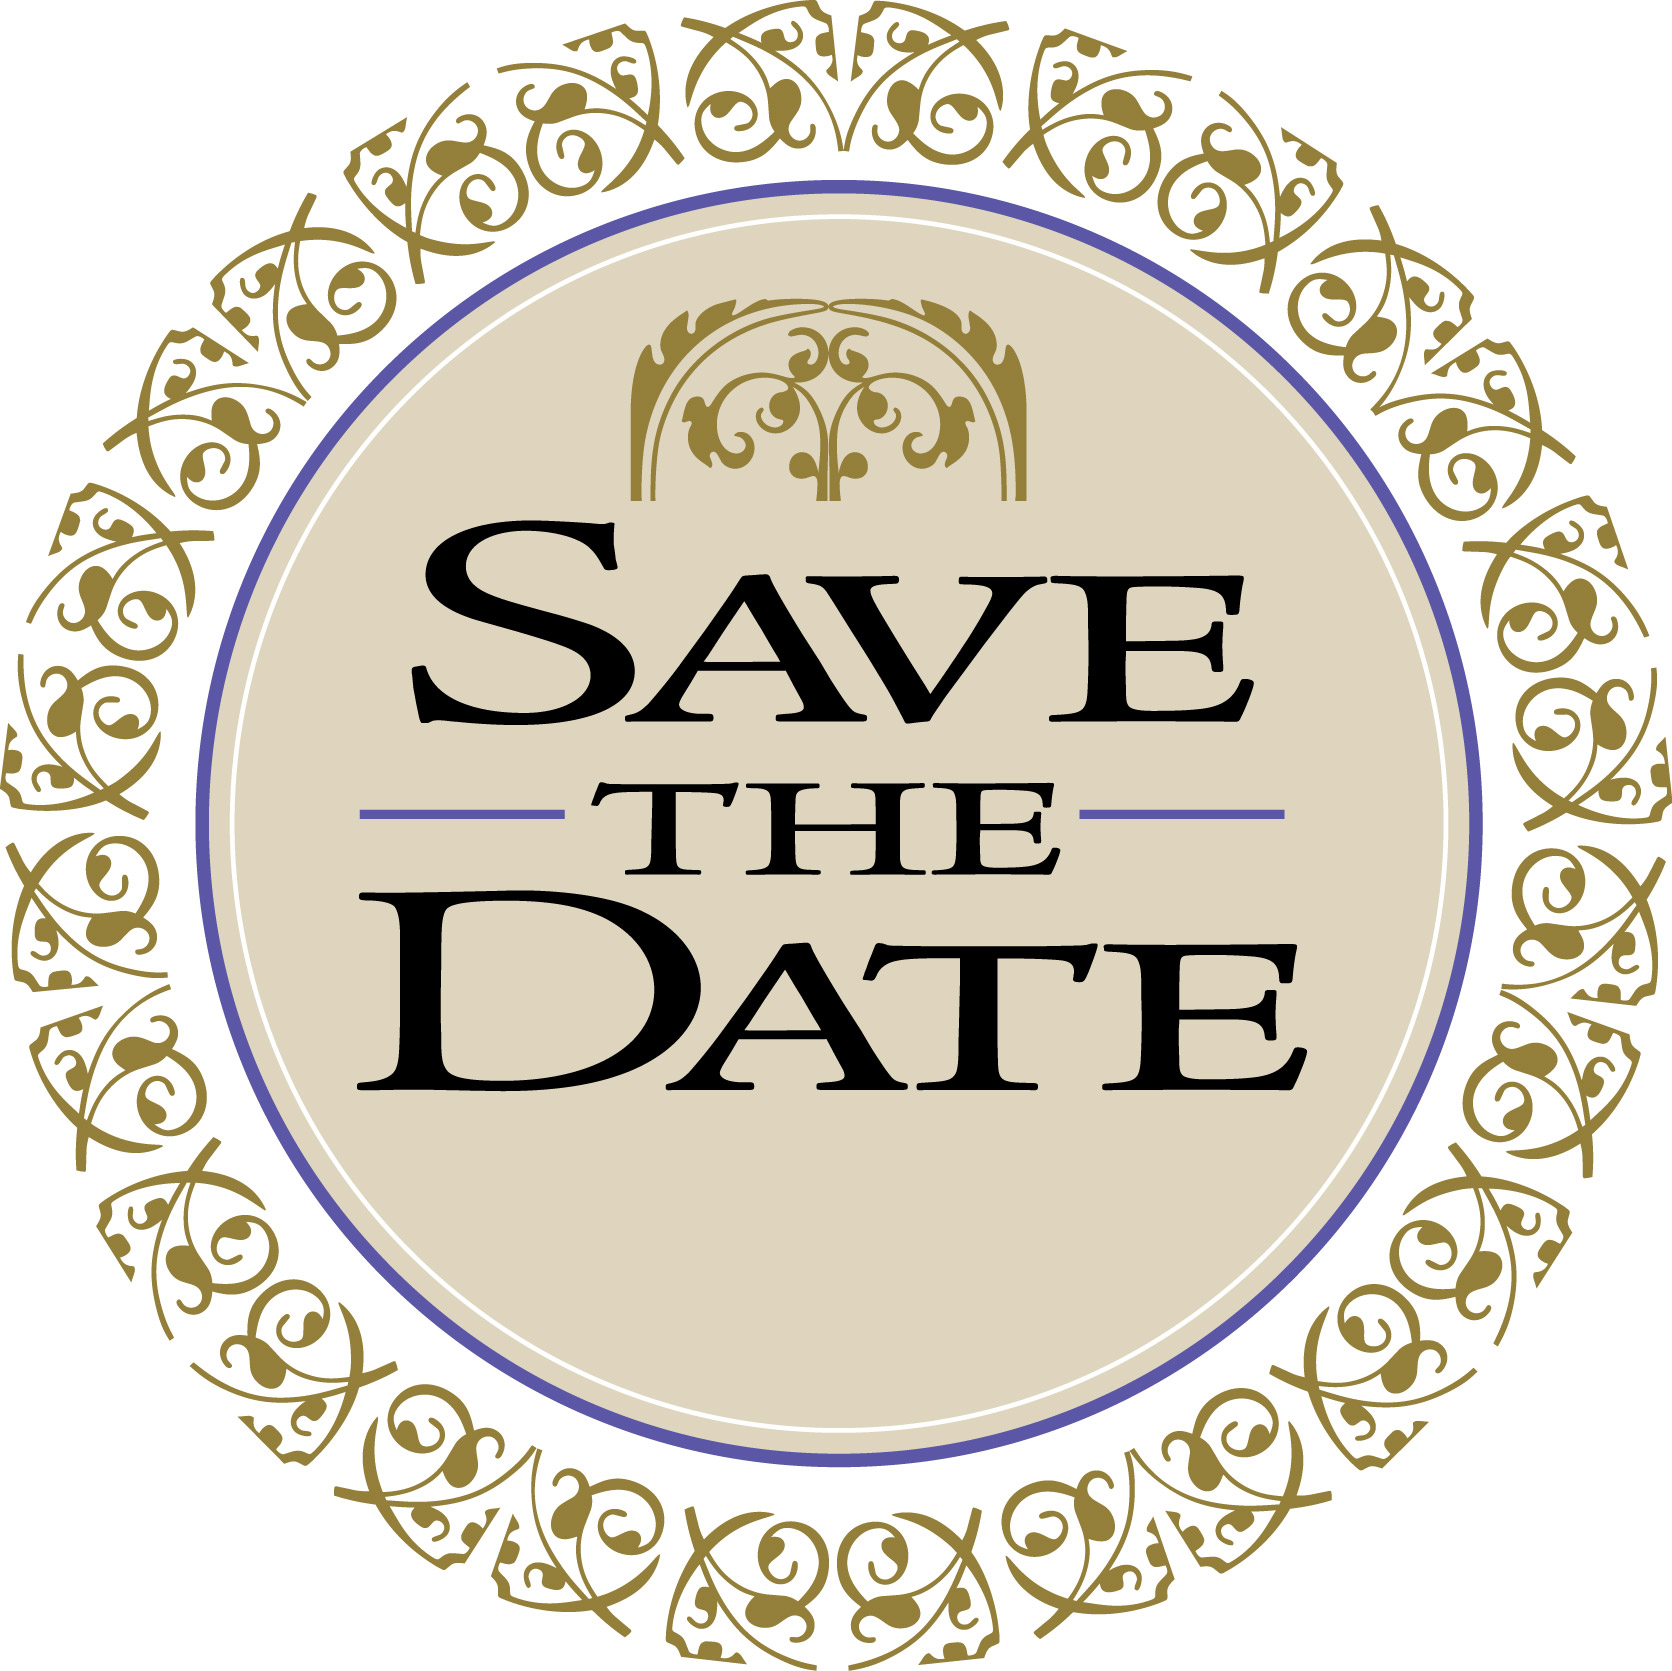 Save the date clipart free getbellhop Clipartix